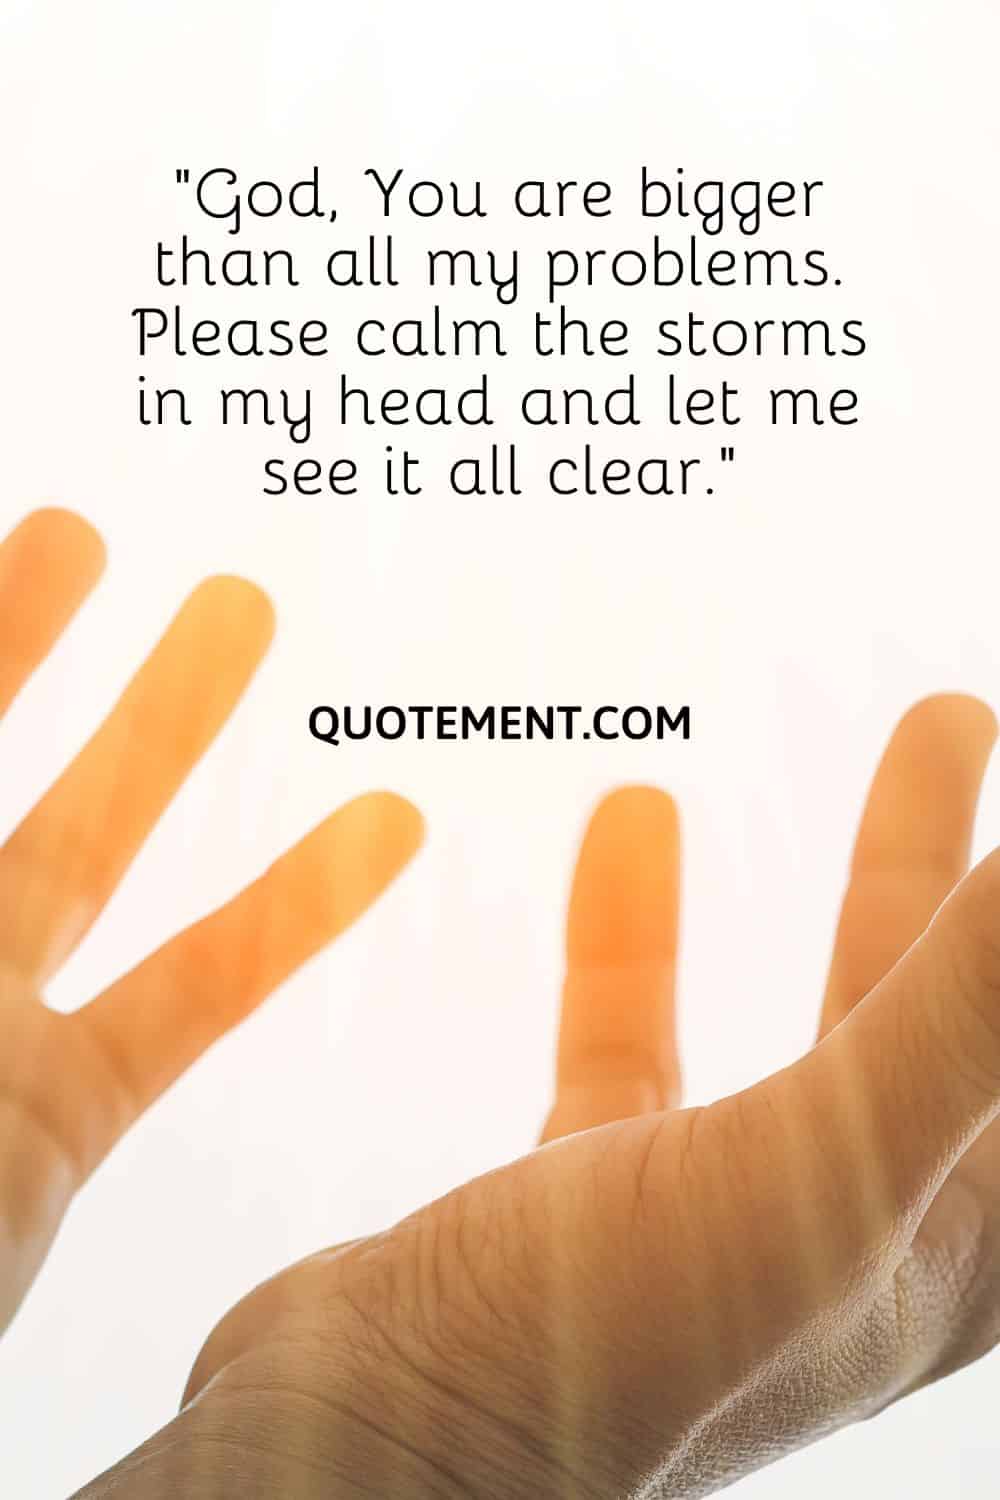 God, You are bigger than all my problems. Please calm the storms in my head and let me see it all clear.